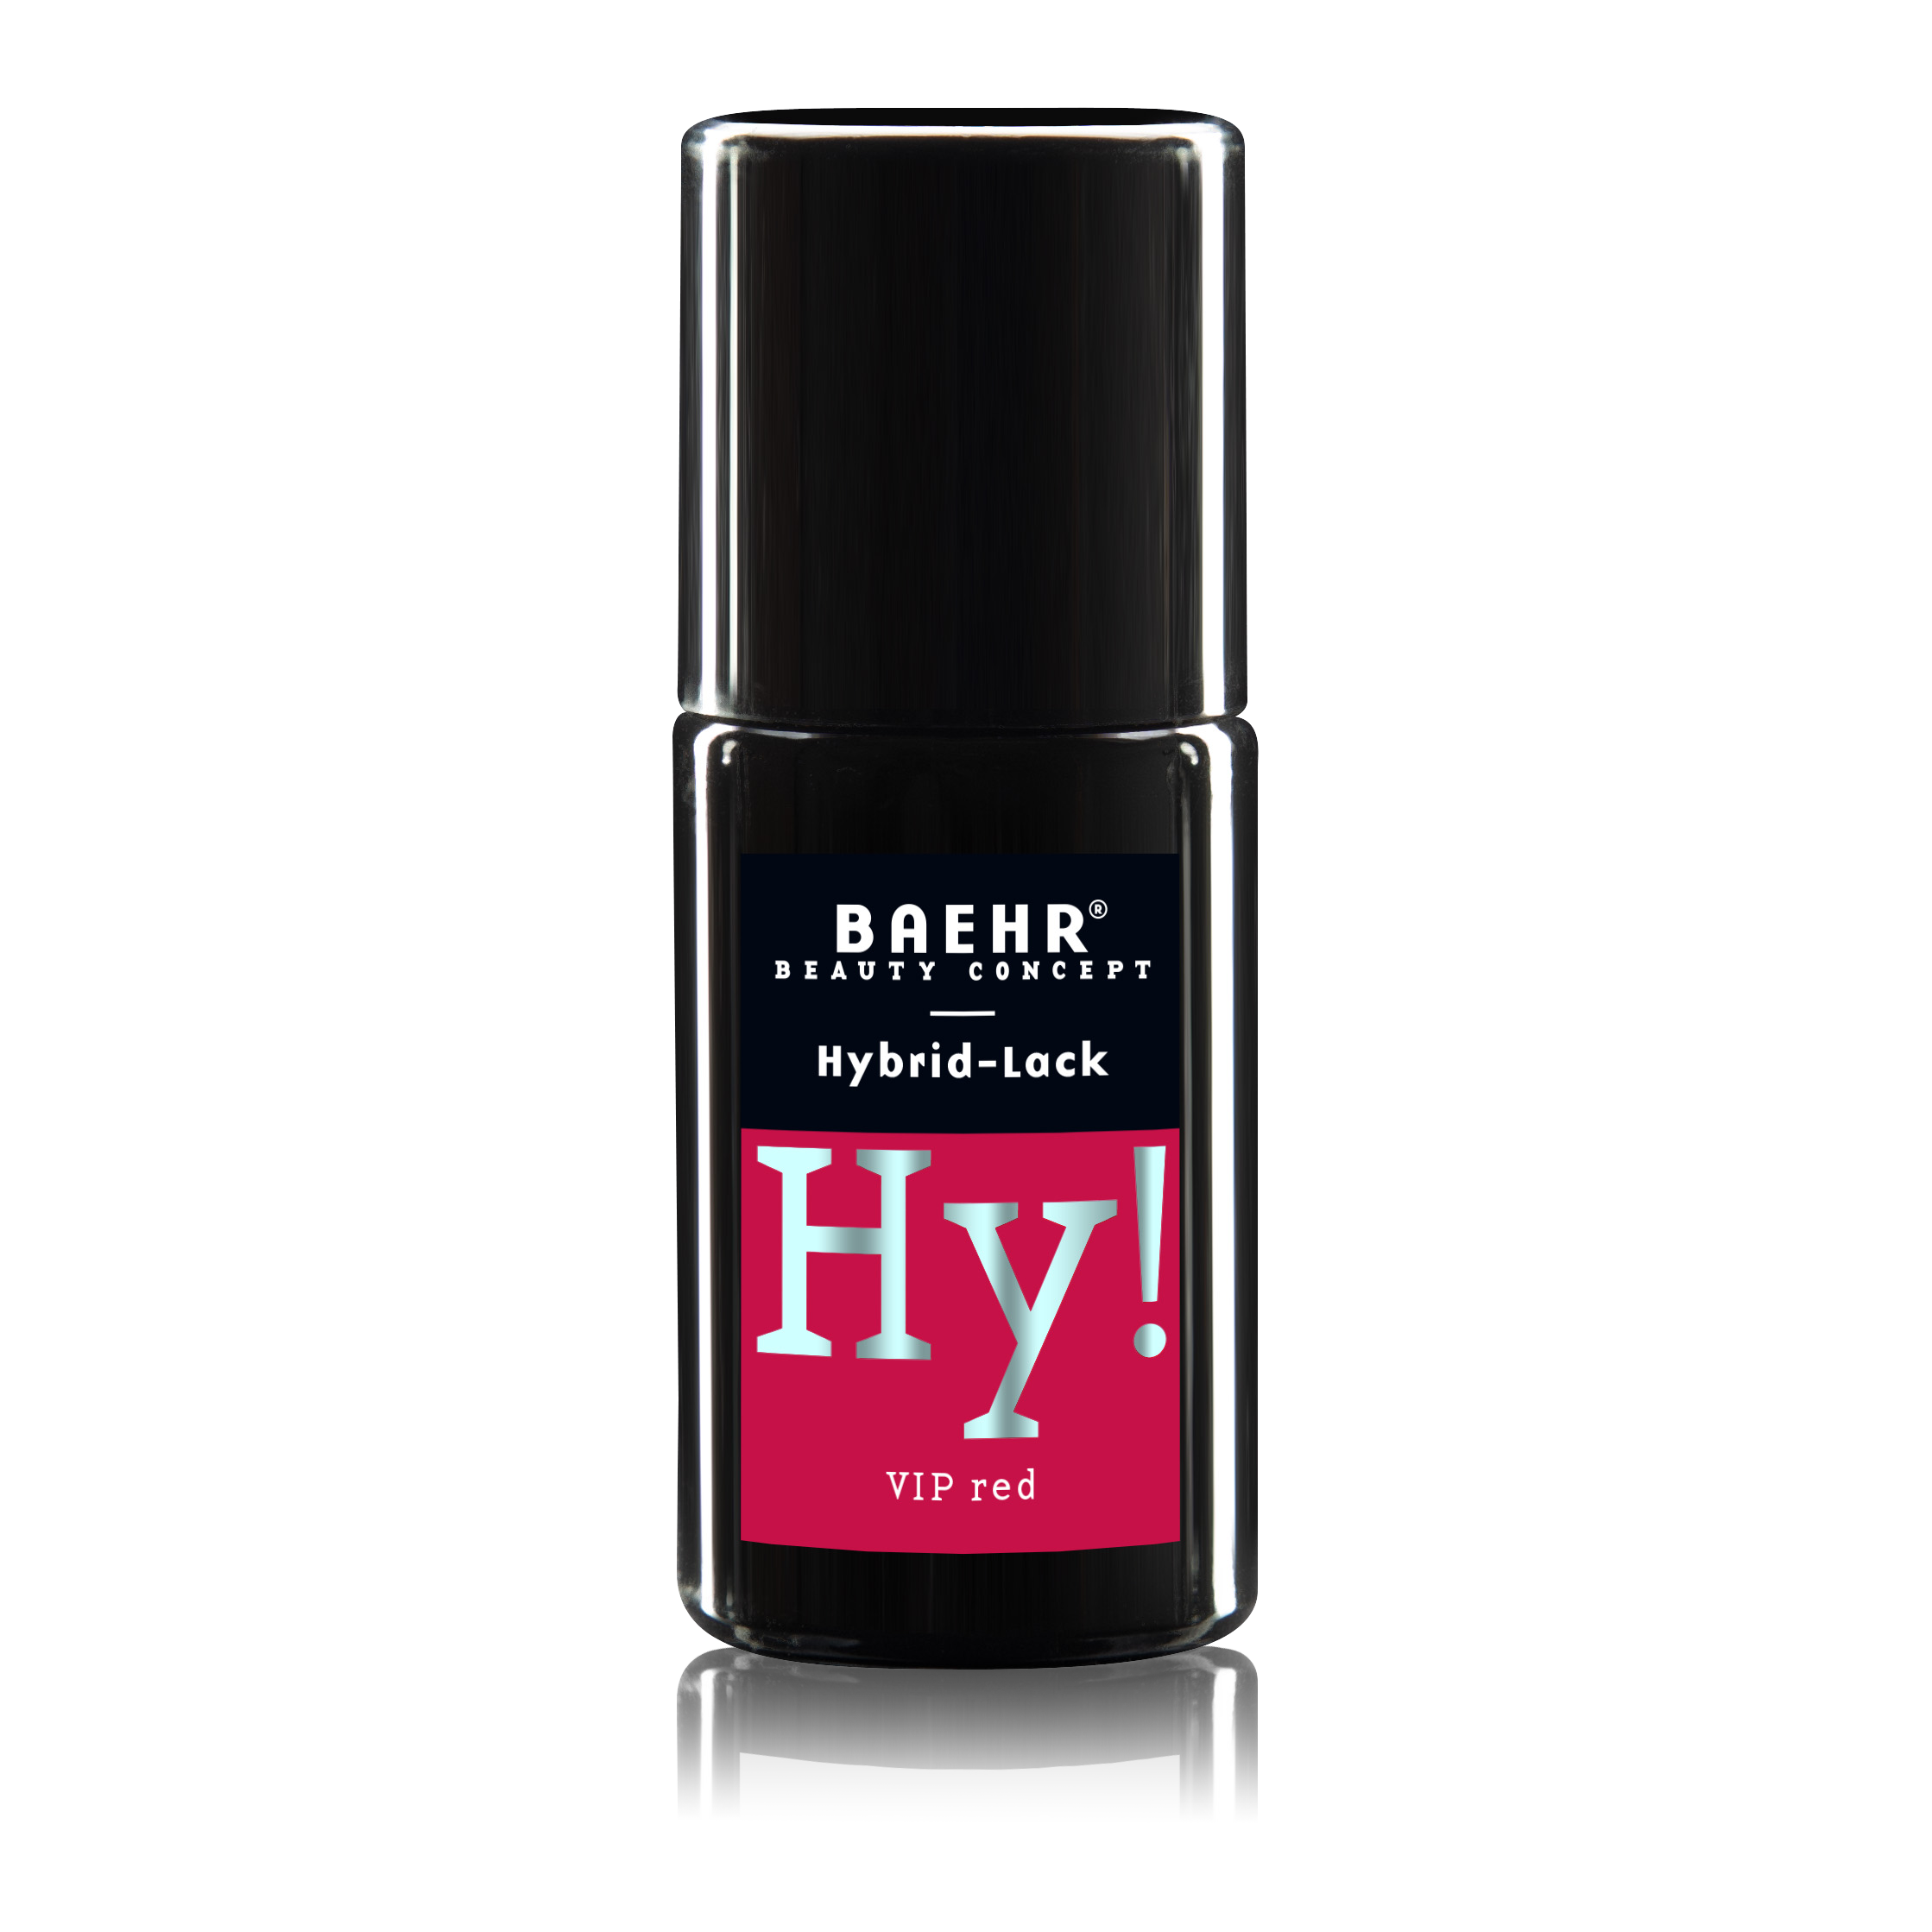 BAEHR BEAUTY CONCEPT - NAILS Hy! Hybrid-Lack, VIP Red 8 ml